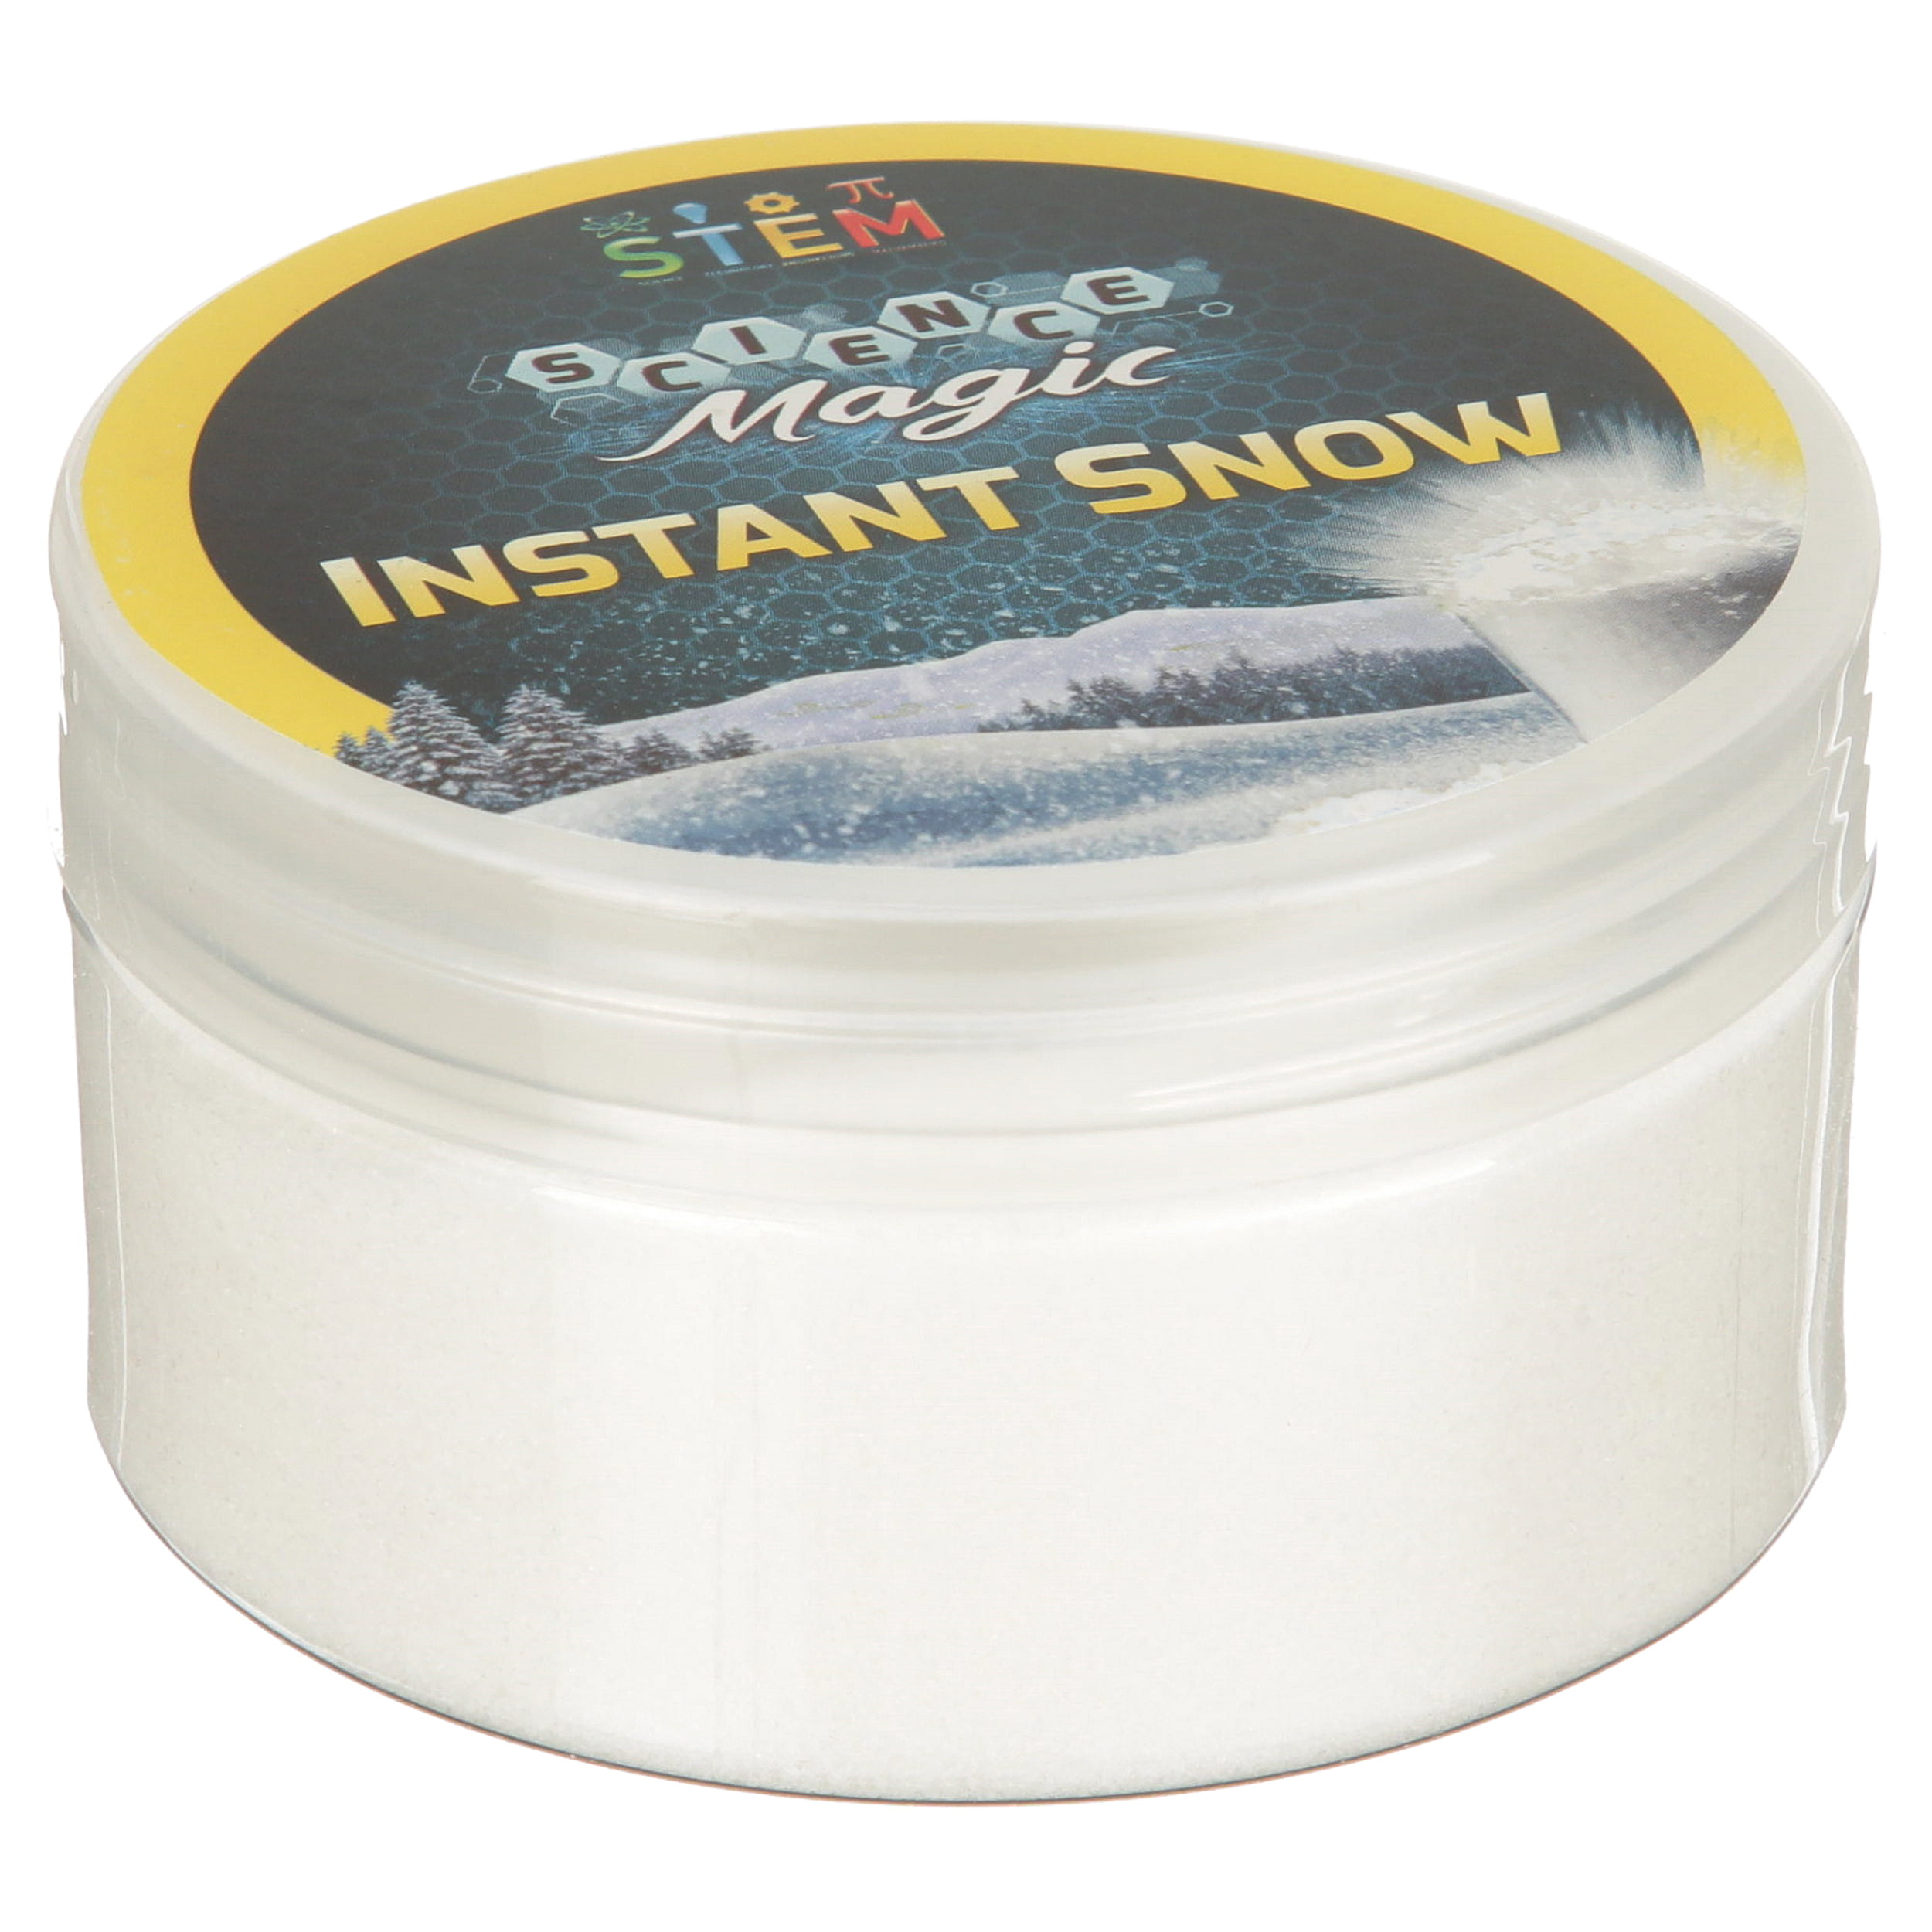 Instant Snow By National Geographic, New Sealed